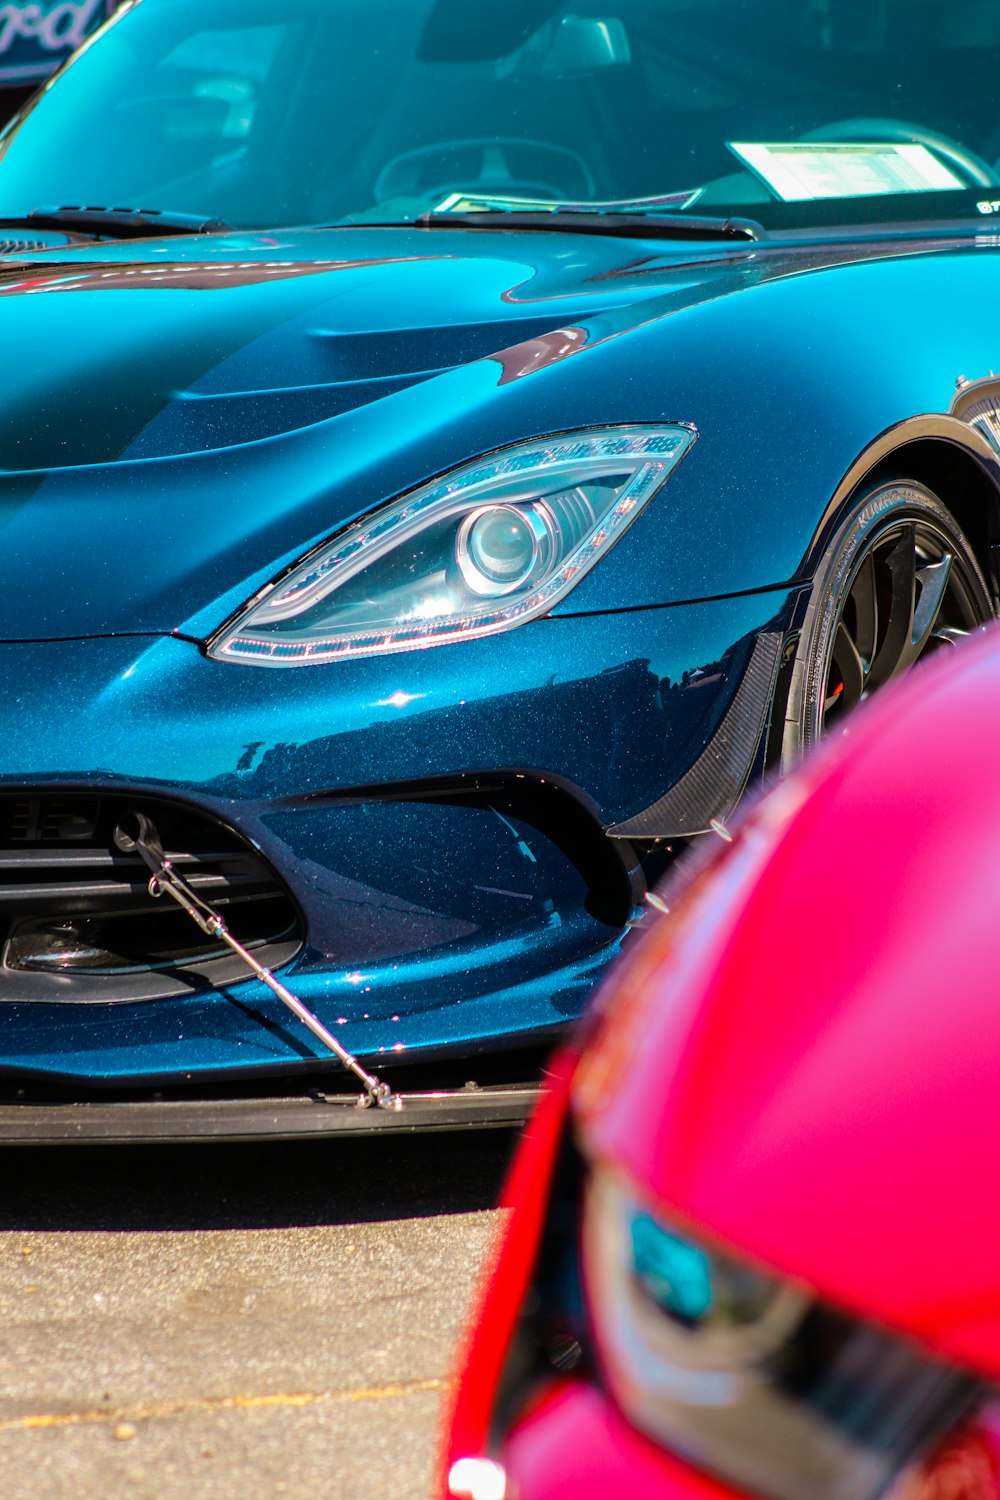 a blue sports car parked next to a red sports car